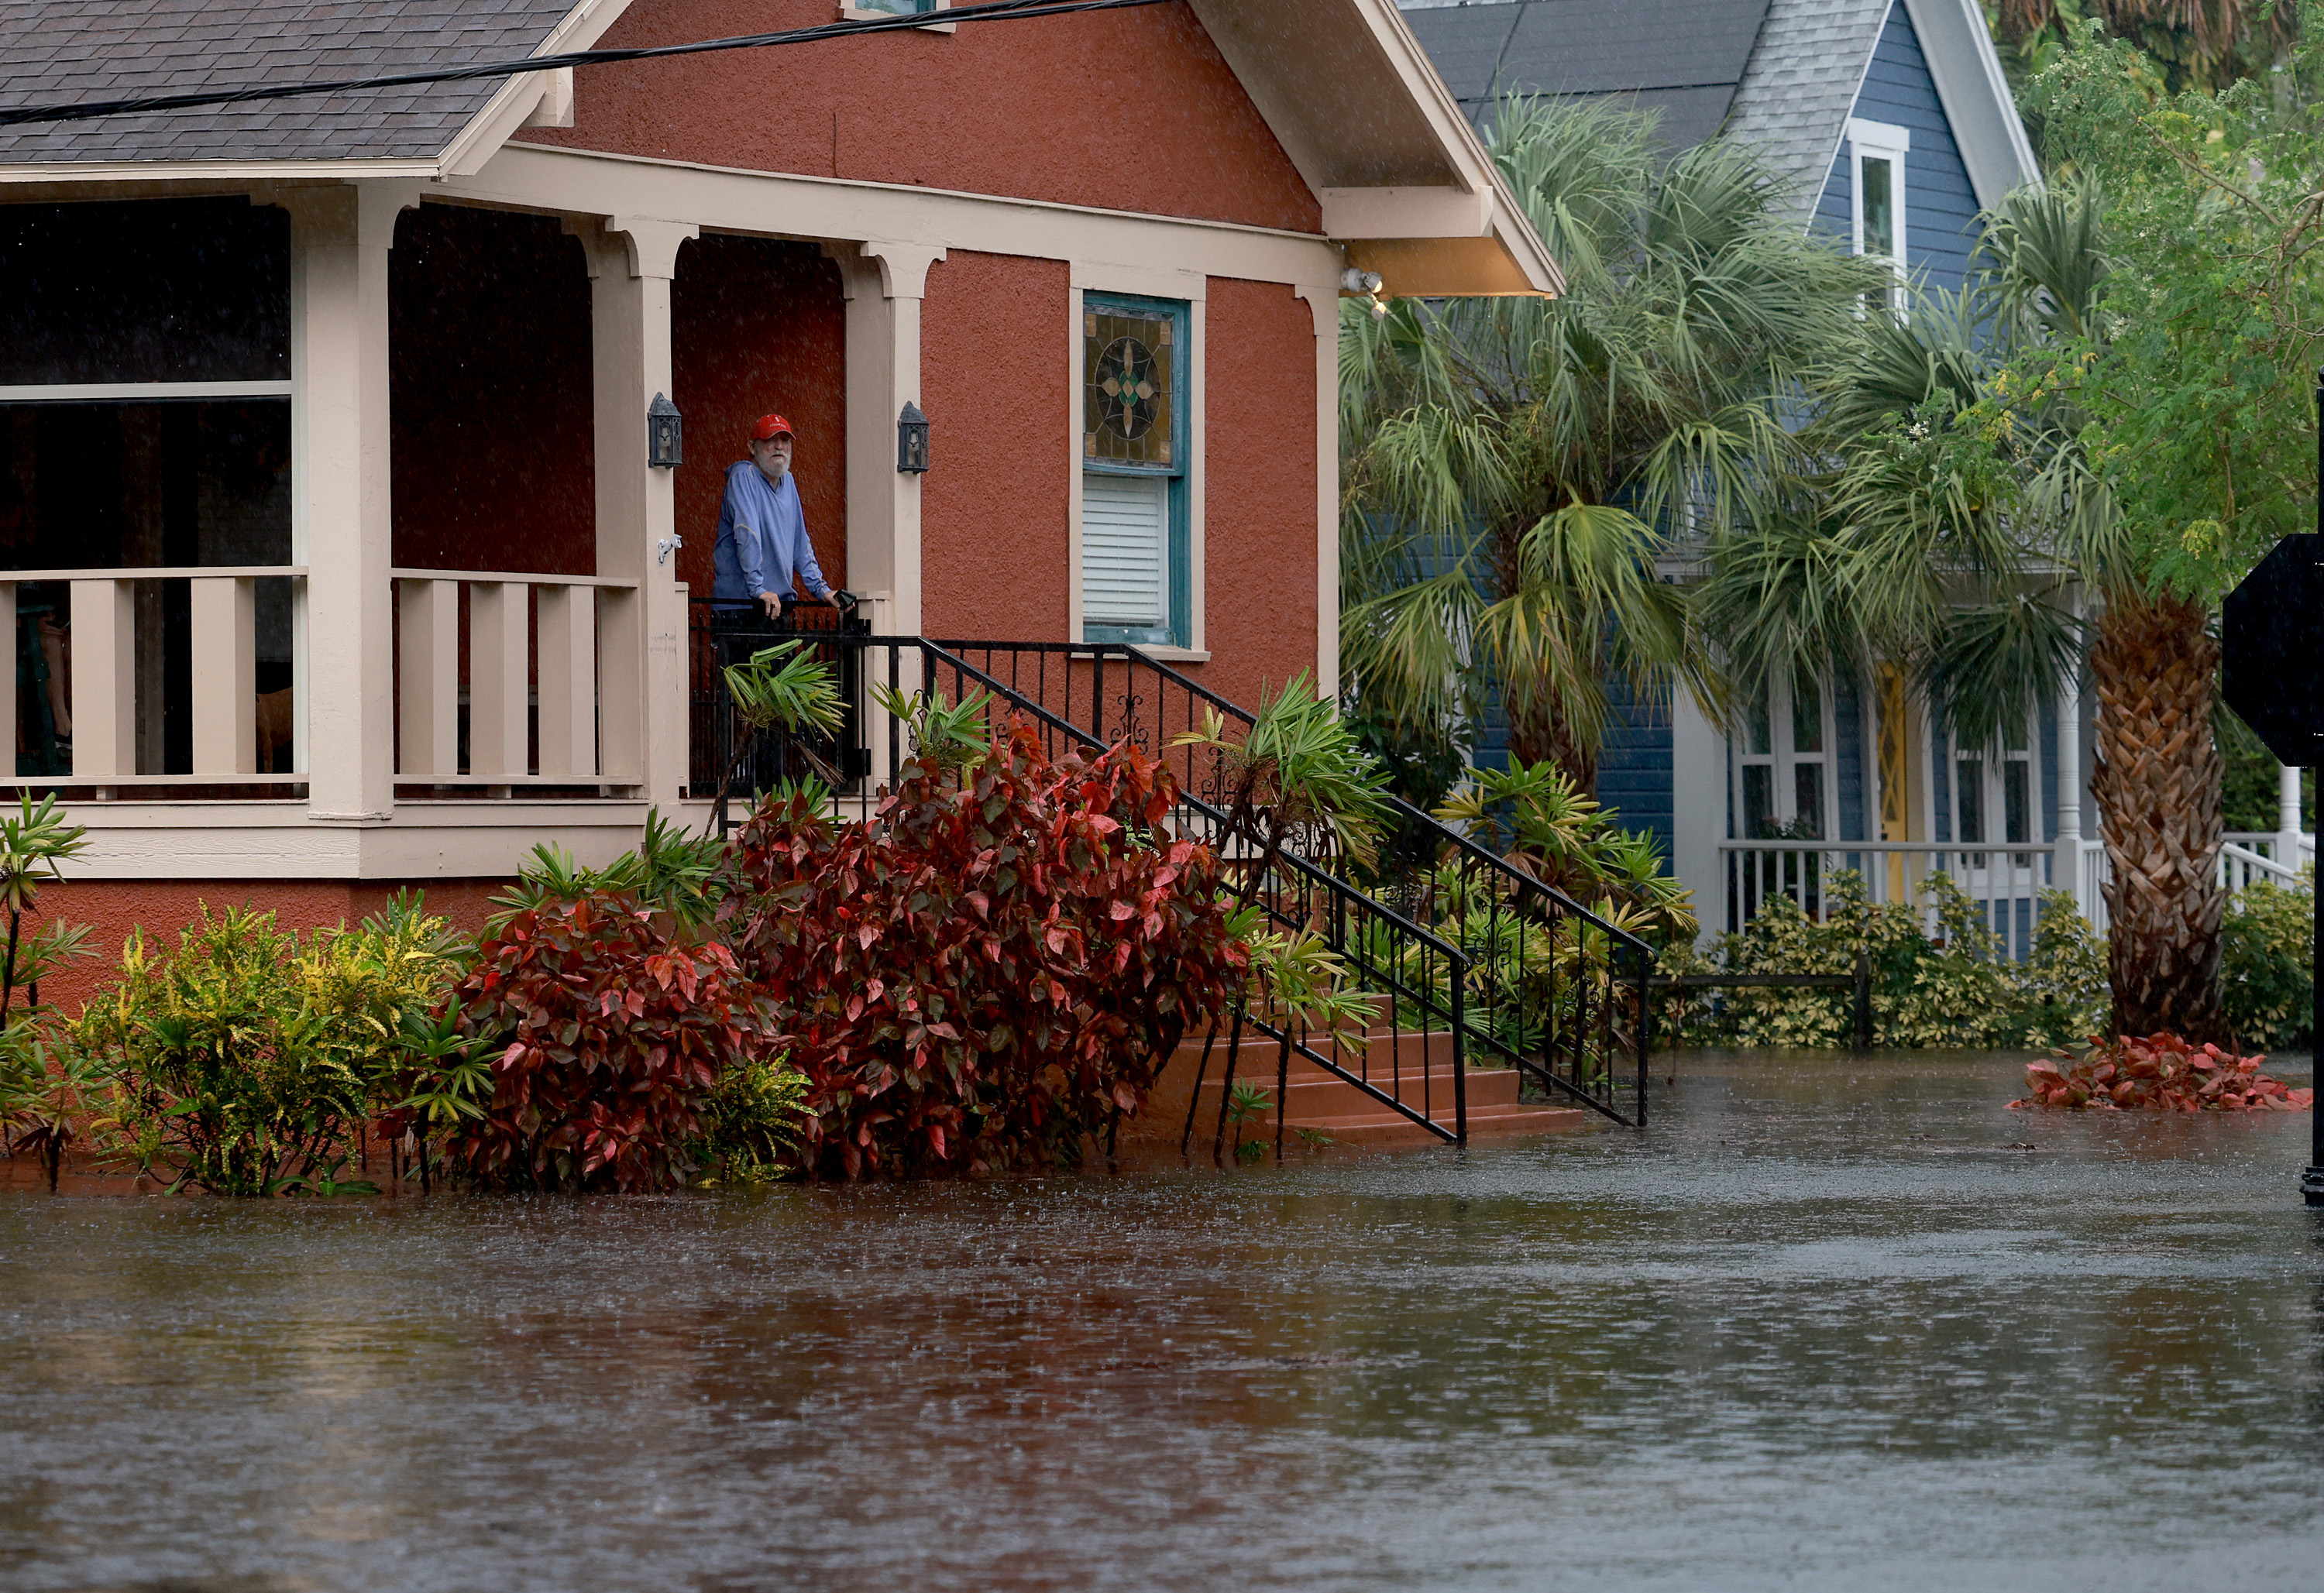 Natural Disasters: Is the US Government in the home insurance business? Should taxpayers be responsible?